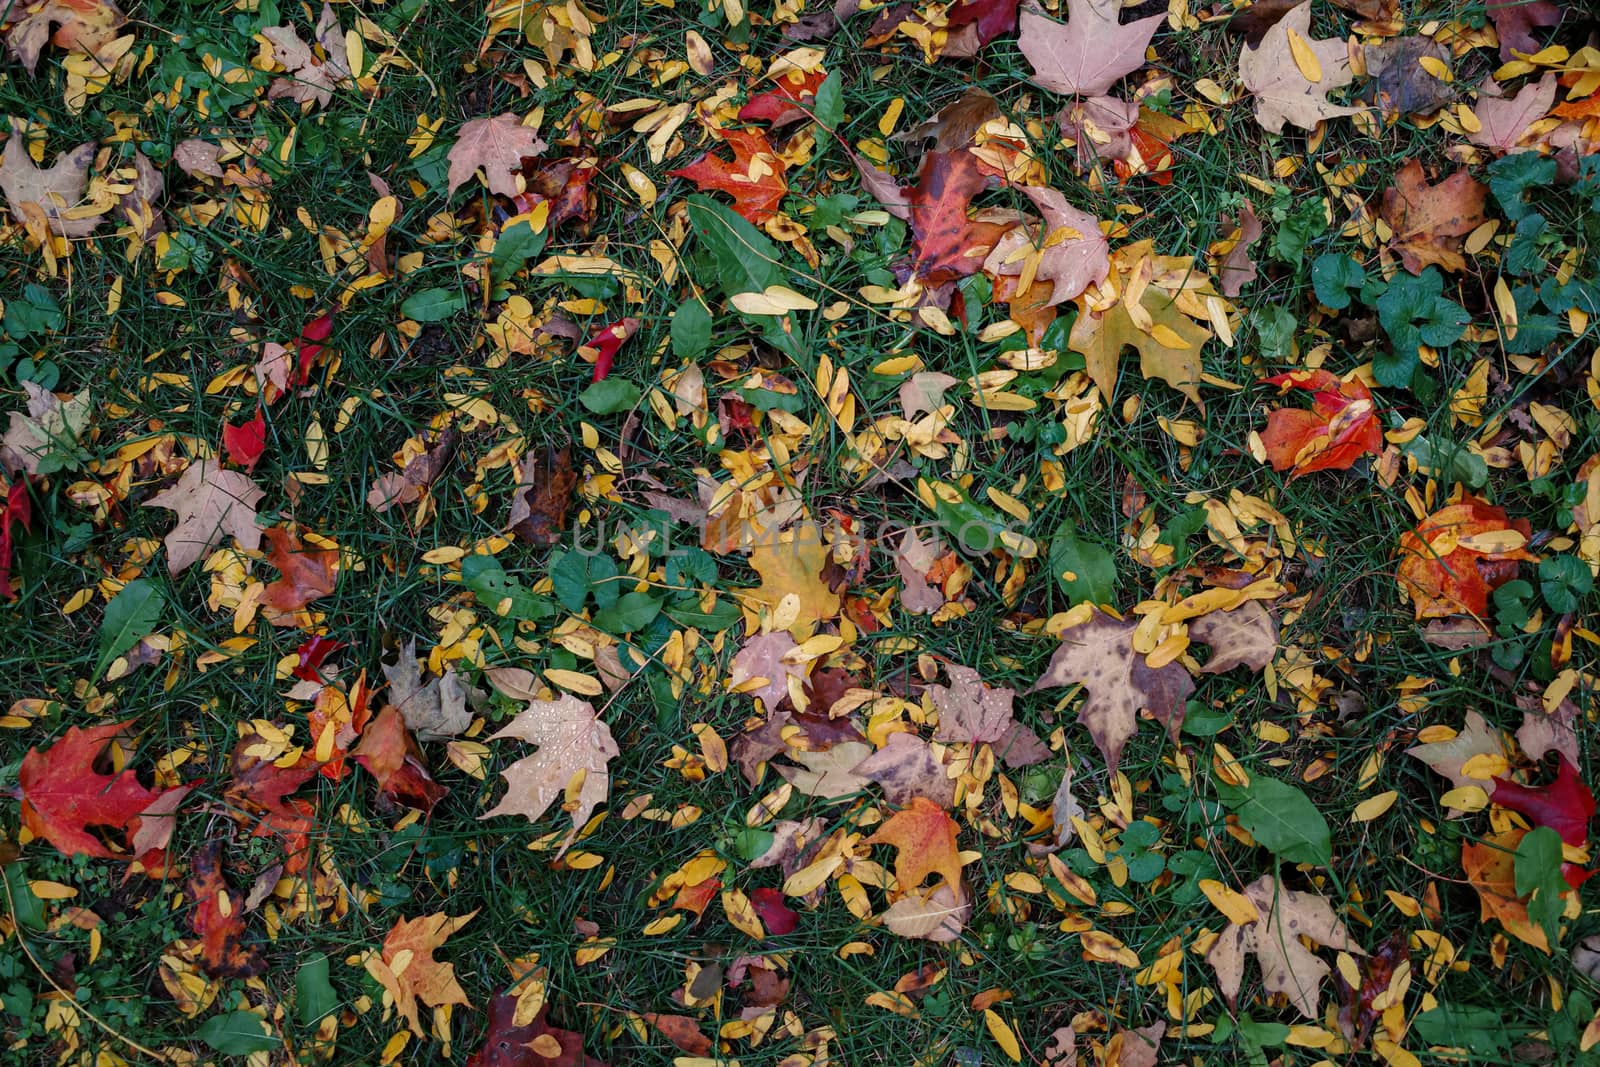 A variety of leaves of yellow, orange and red colors have fallen on green grass and other ground plants in an overhead view.